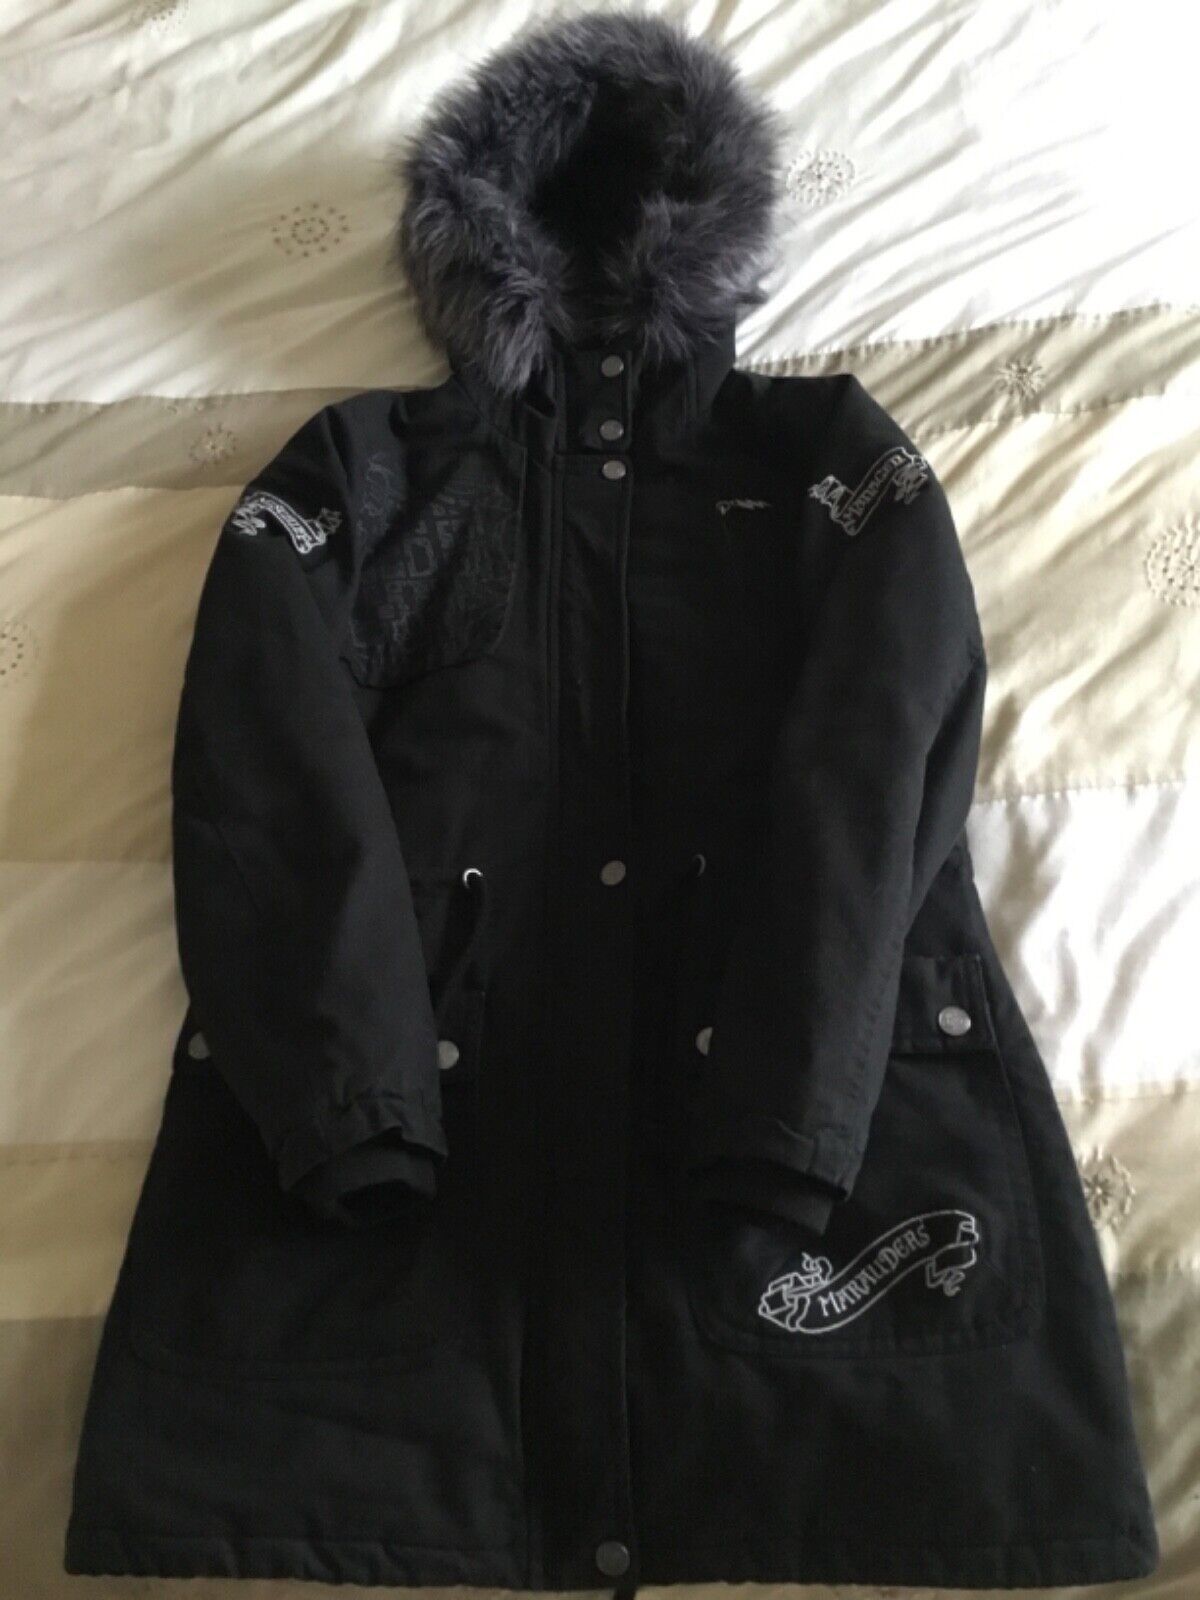 HARRY POTTER WARM WINTER BLACK ICONIC “TOP QUALITY COAT” **(NOT USED VERY MUCH)*